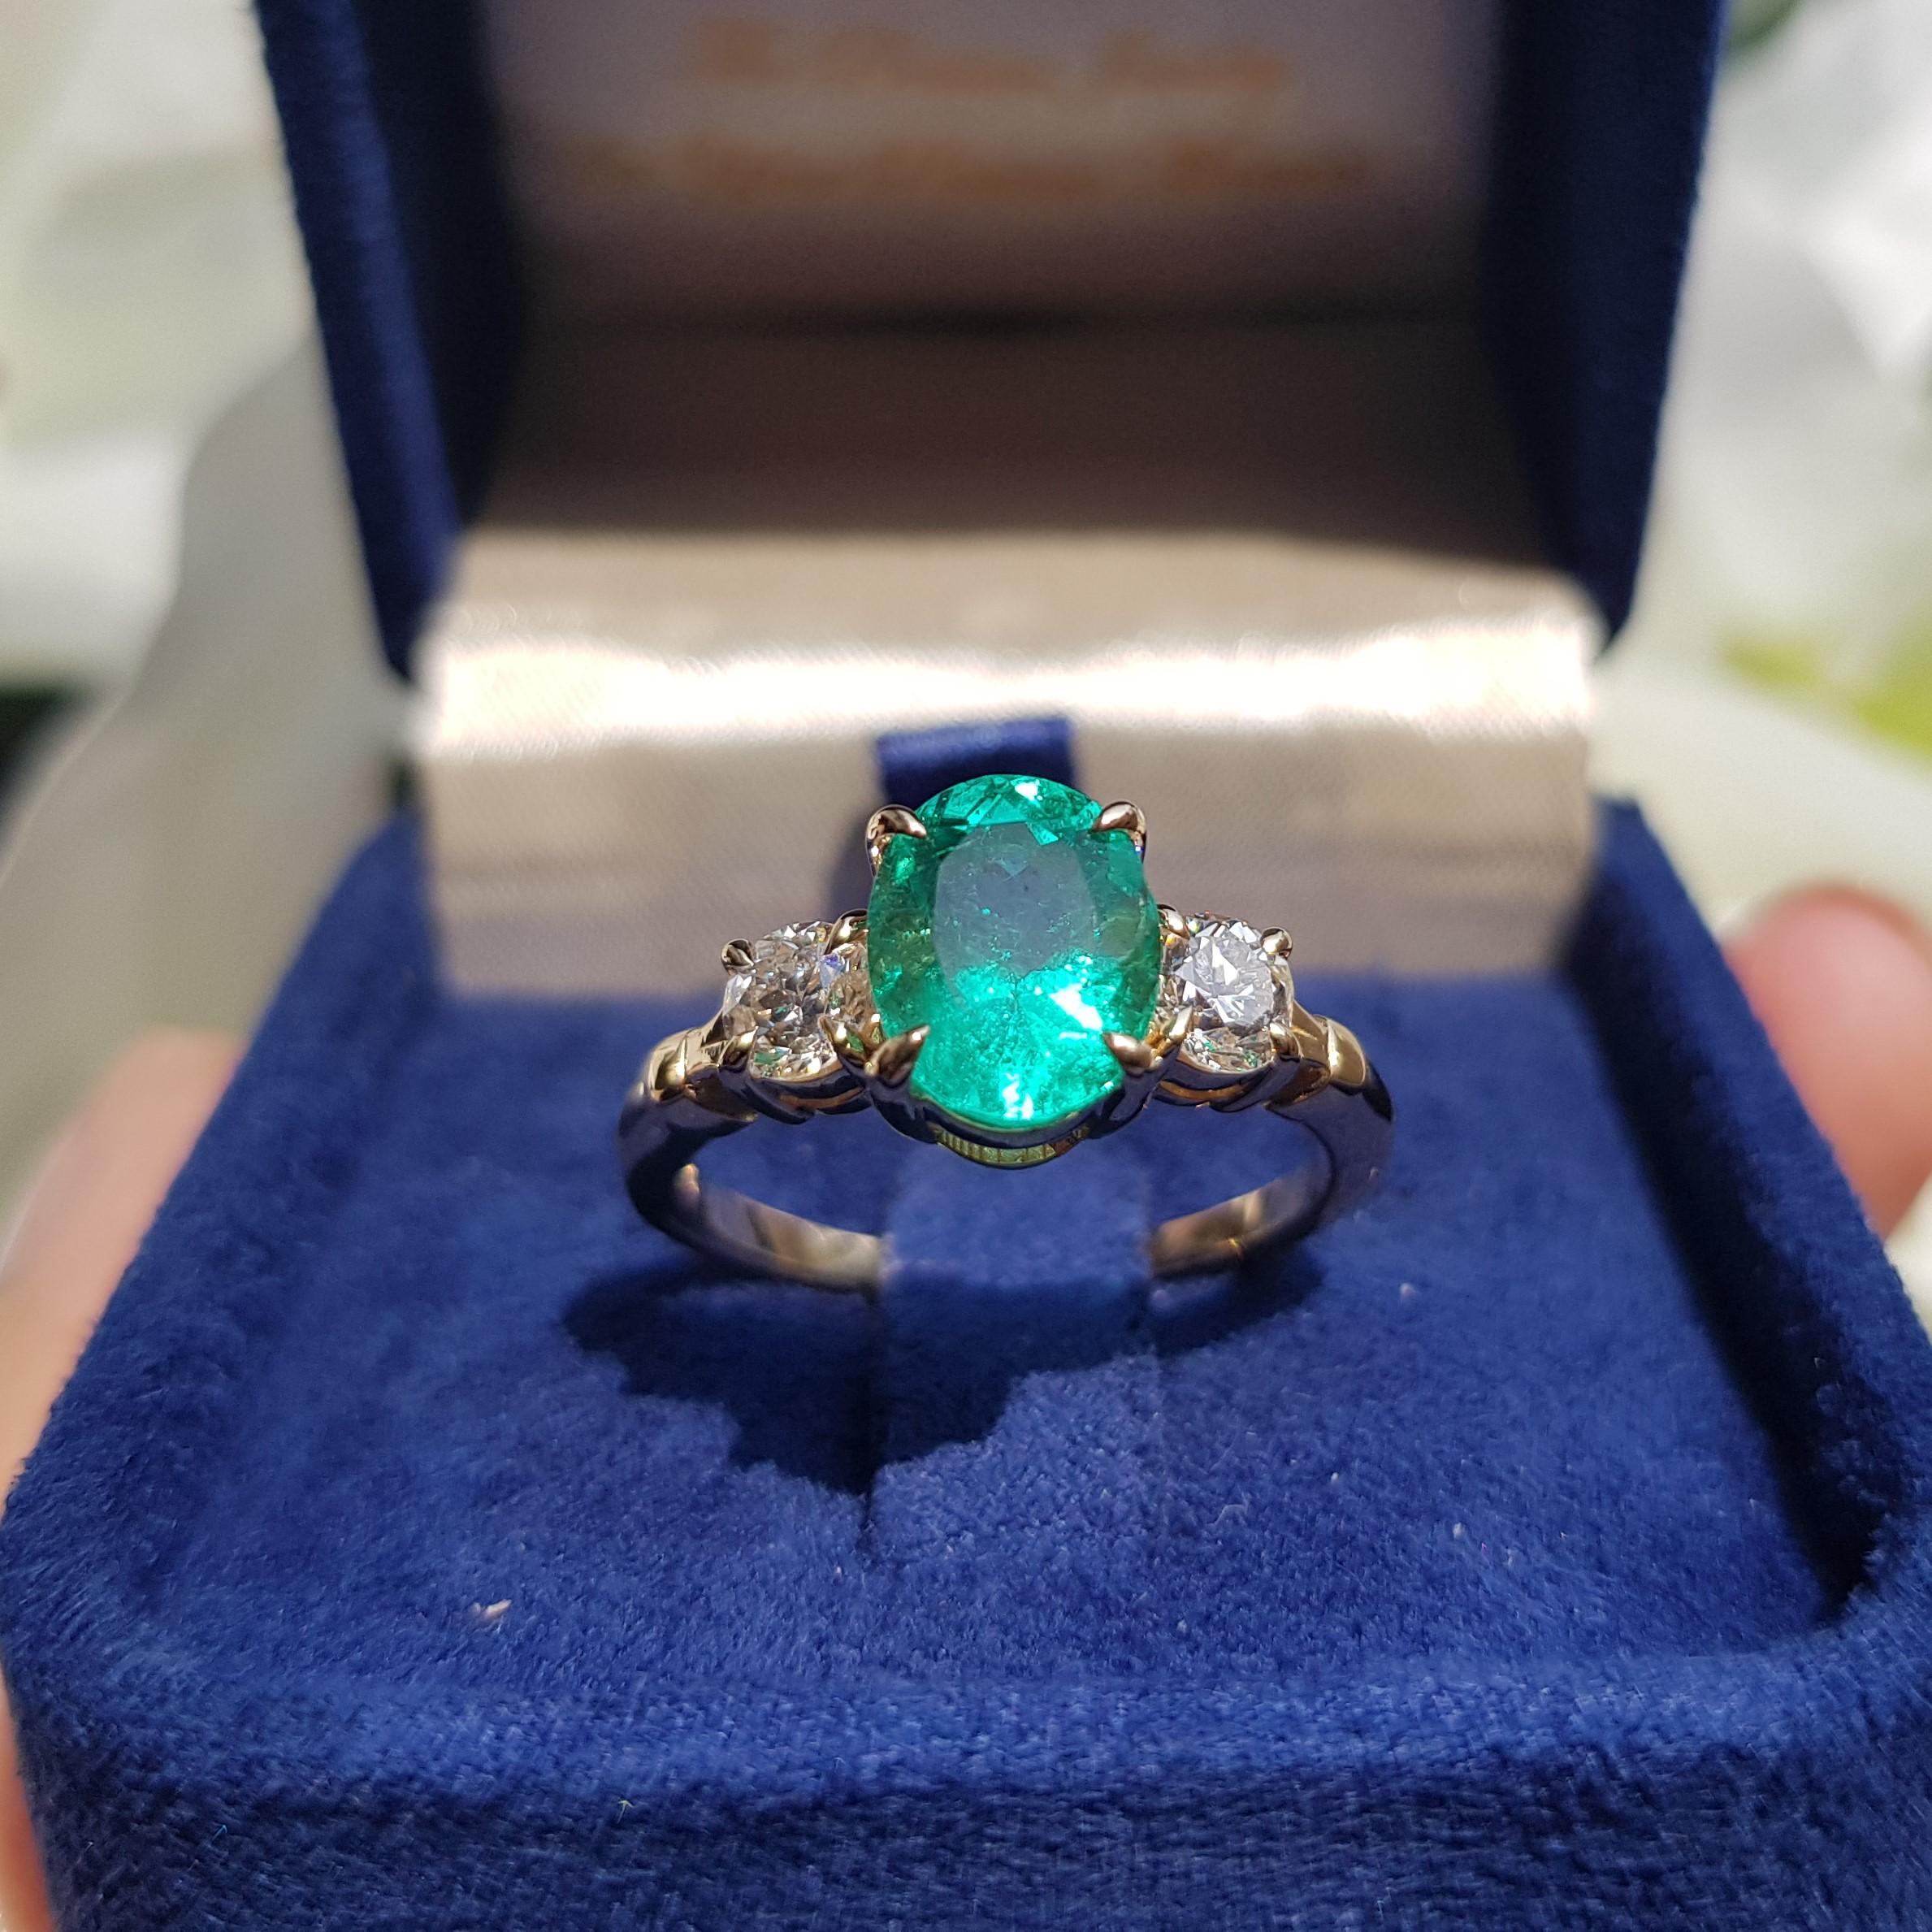 Sophisticated and stunning, this petite emerald and diamond ring is a classic three-stone design crafted in solid 18K yellow gold. A vibrant 2.03 carats oval-cut emerald gemstone is accented by two round old-cut diamonds, for a look that never goes